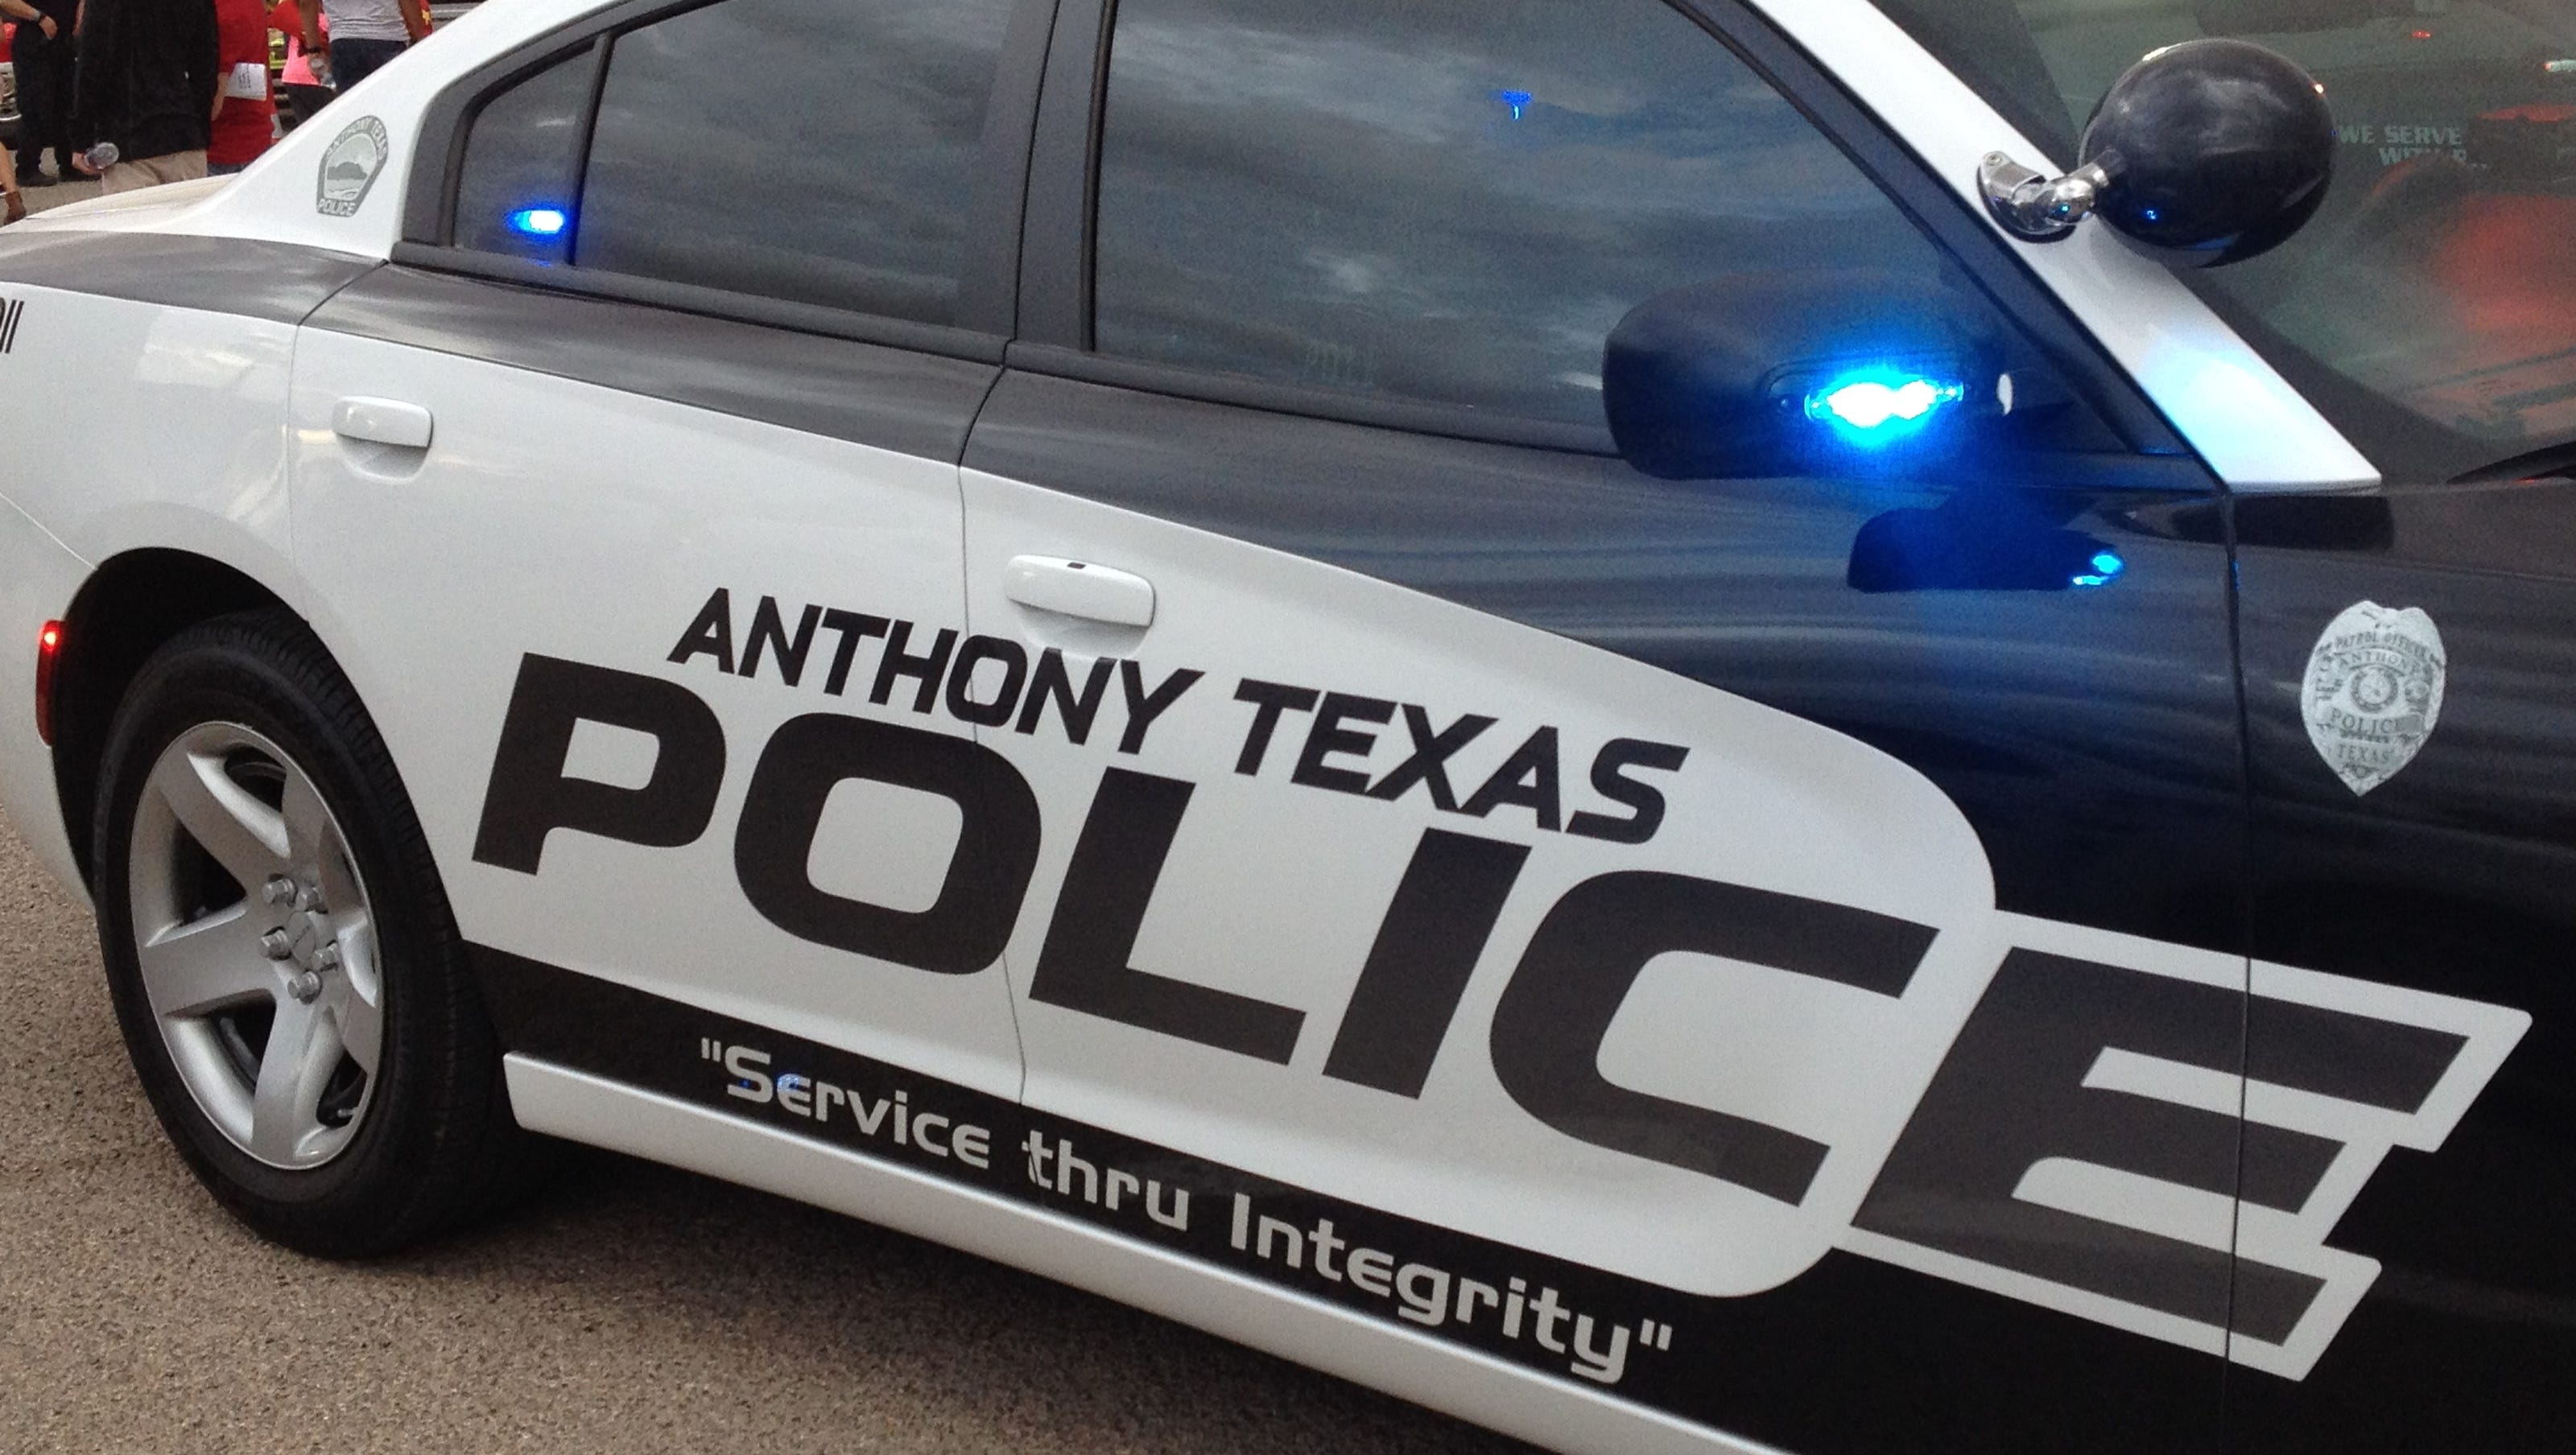  One dead in SUV, semitrailer collision near Anthony, Texas, truck stop 